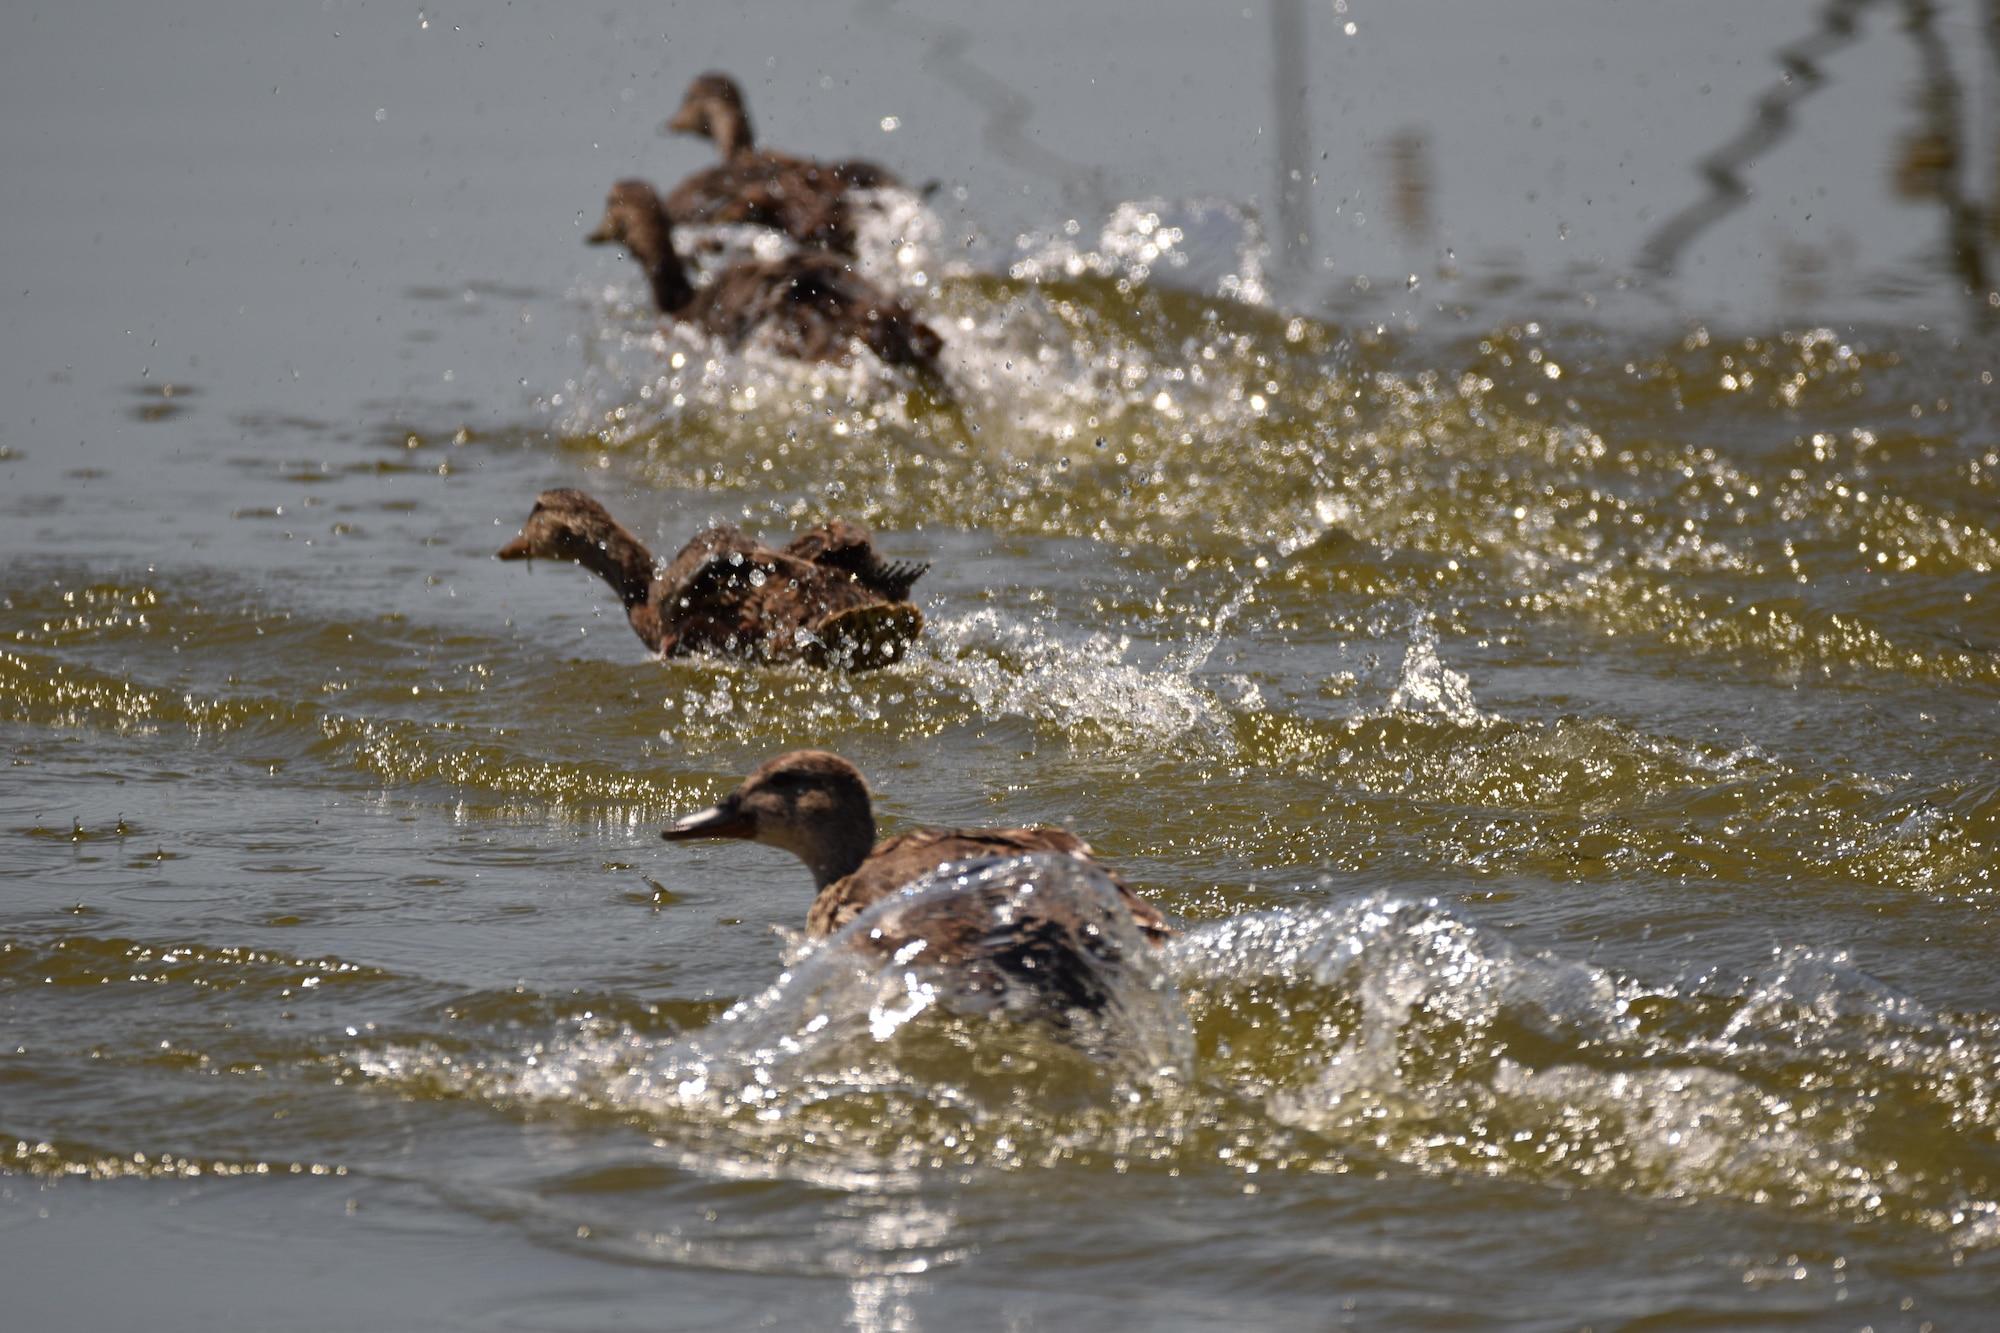 A group of Blue-Winged Teal ducks take flight at Piute Ponds. Piute Ponds spans 9,600 acres and consists of numerous claypan ponds and low sand dunes. (U.S. Air Force photo by Christopher Ball)